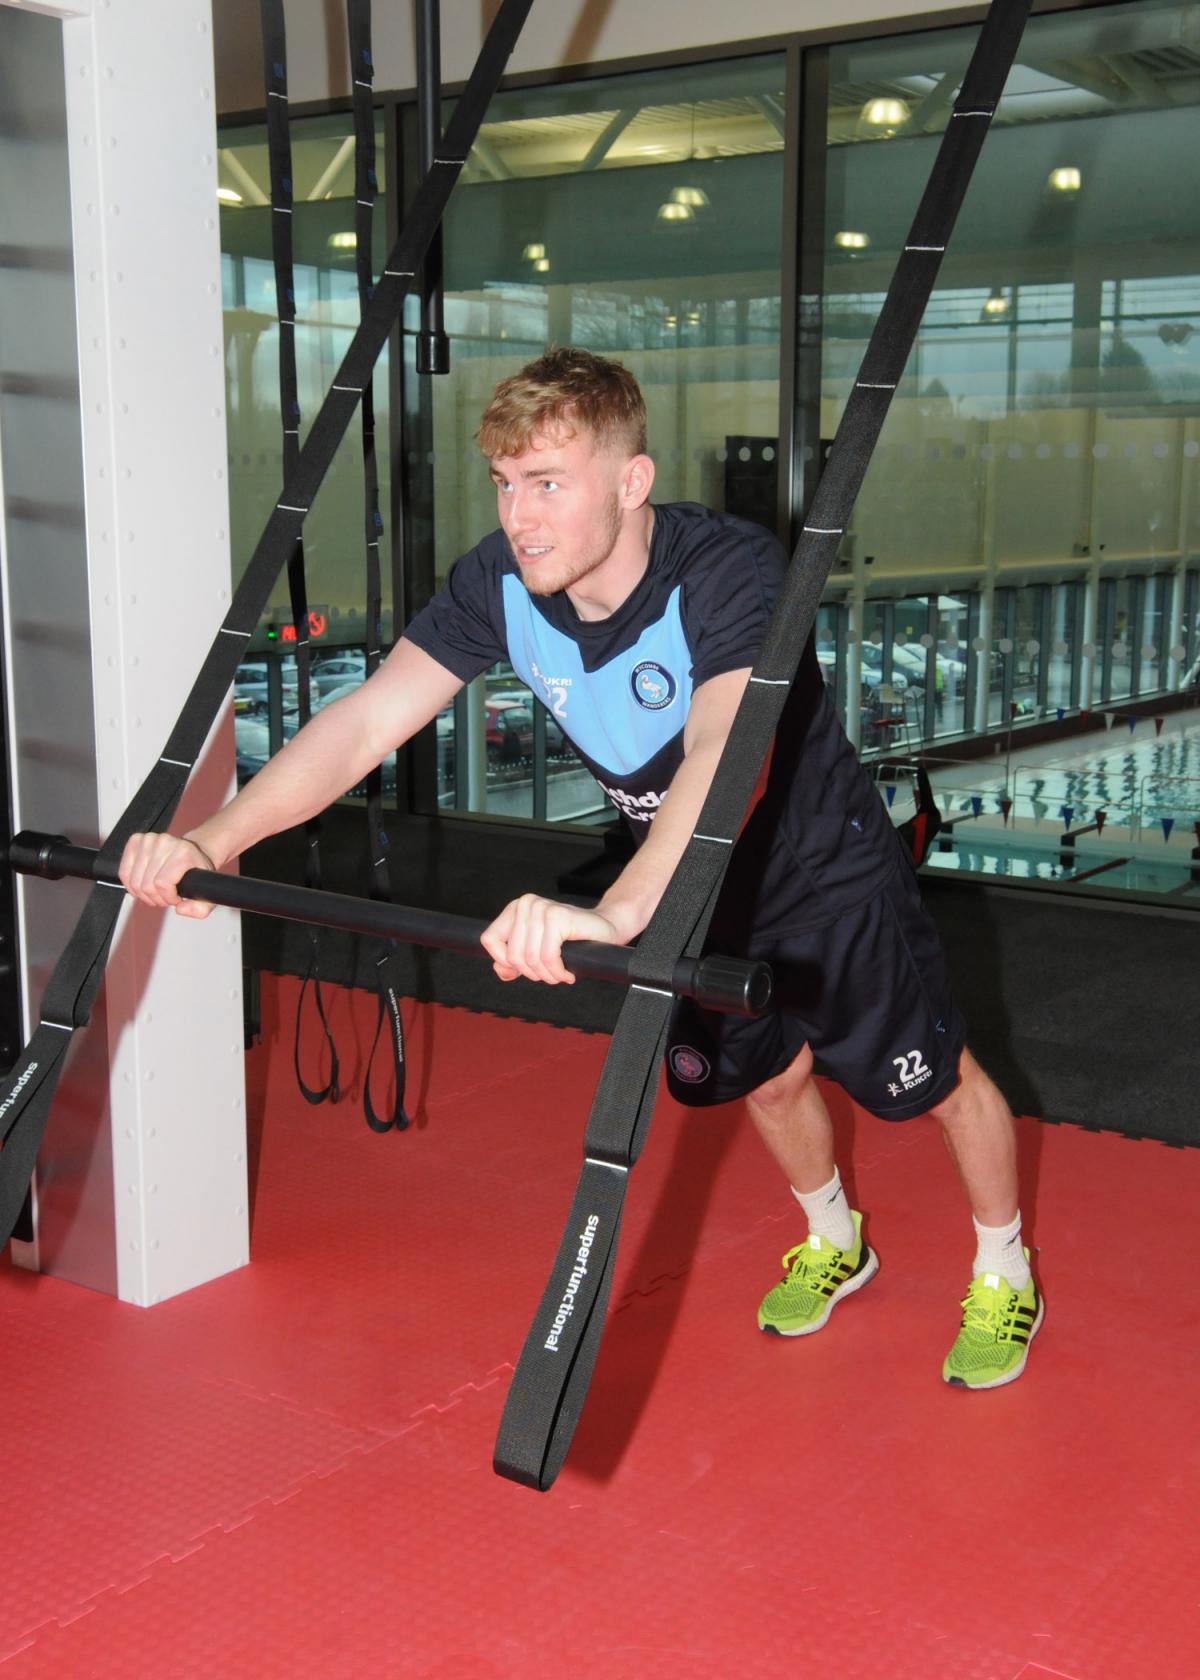 Wycombe Wanderers train at the newly opened Wycombe Leisure Centre - ARM Images